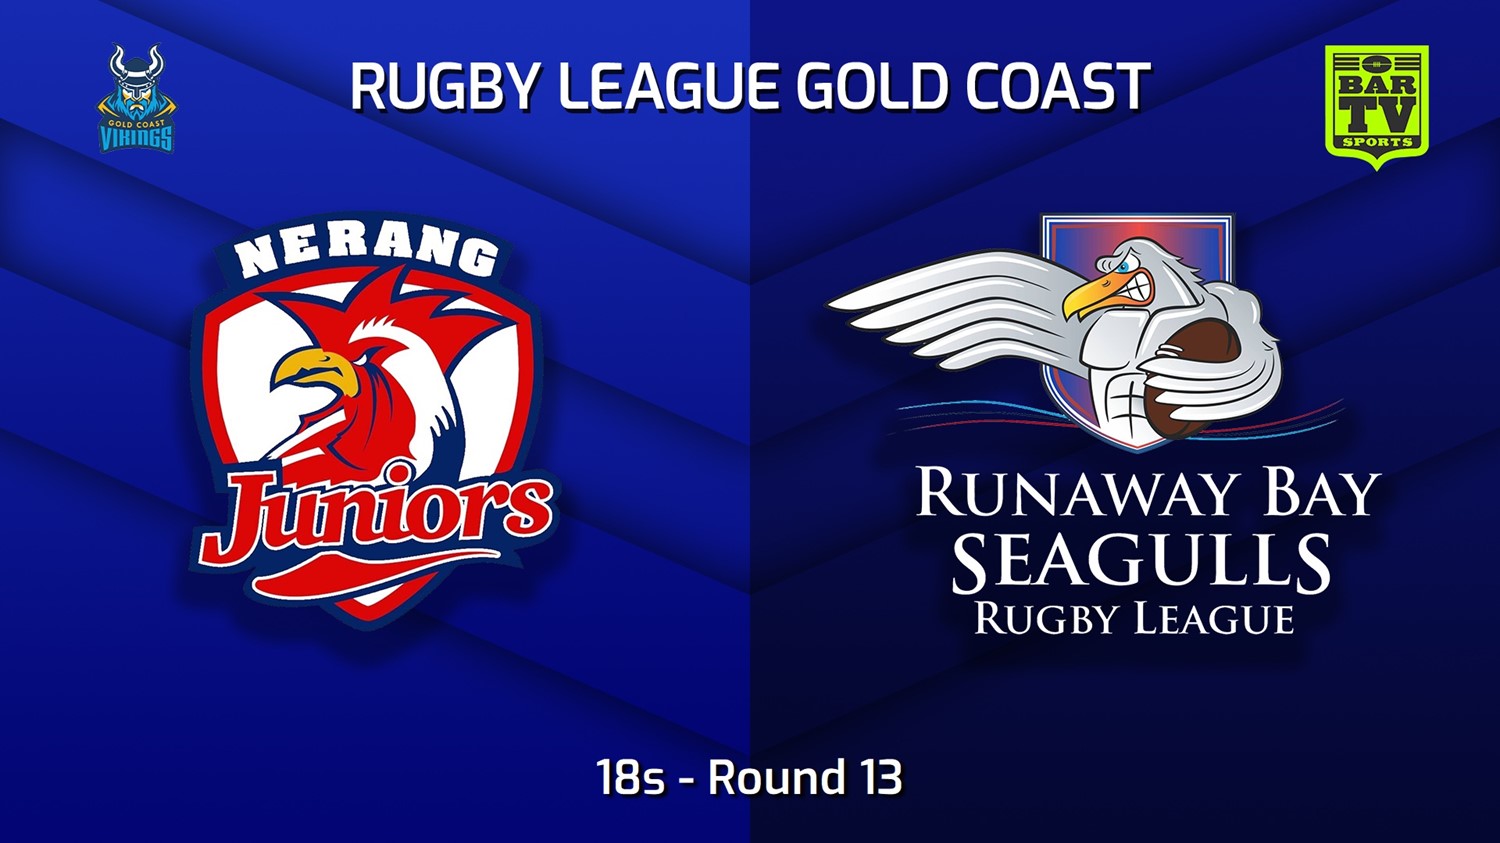 220710-Gold Coast Round 13 - 18s - Nerang Roosters v Runaway Bay Seagulls Slate Image